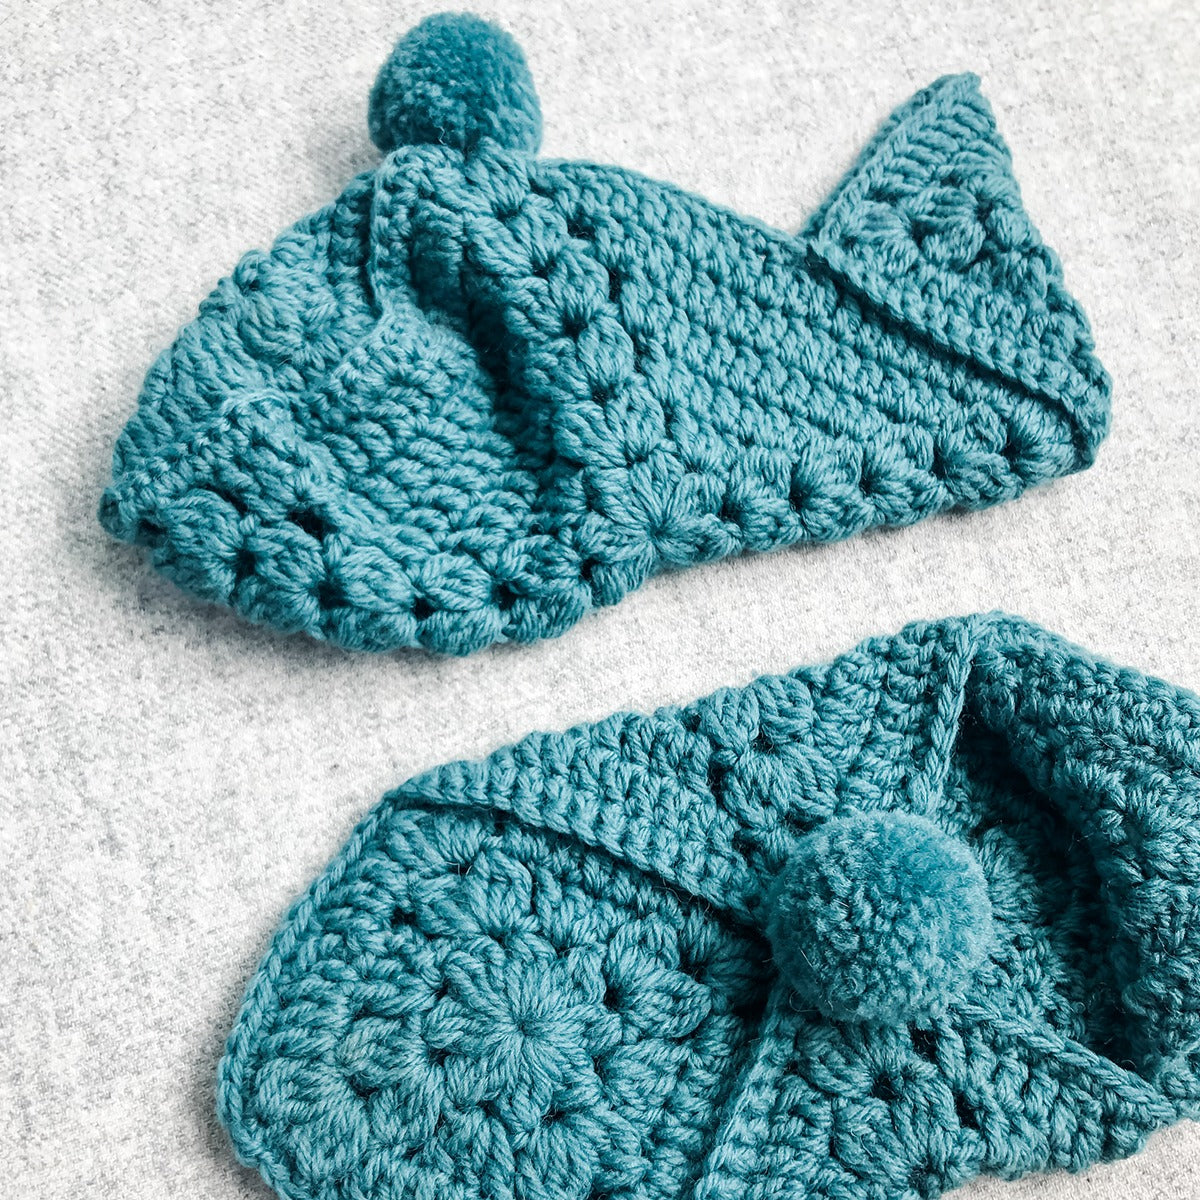 Kelbourne Woolens Kits Year of Gifts Kit - July Hosta Slippers